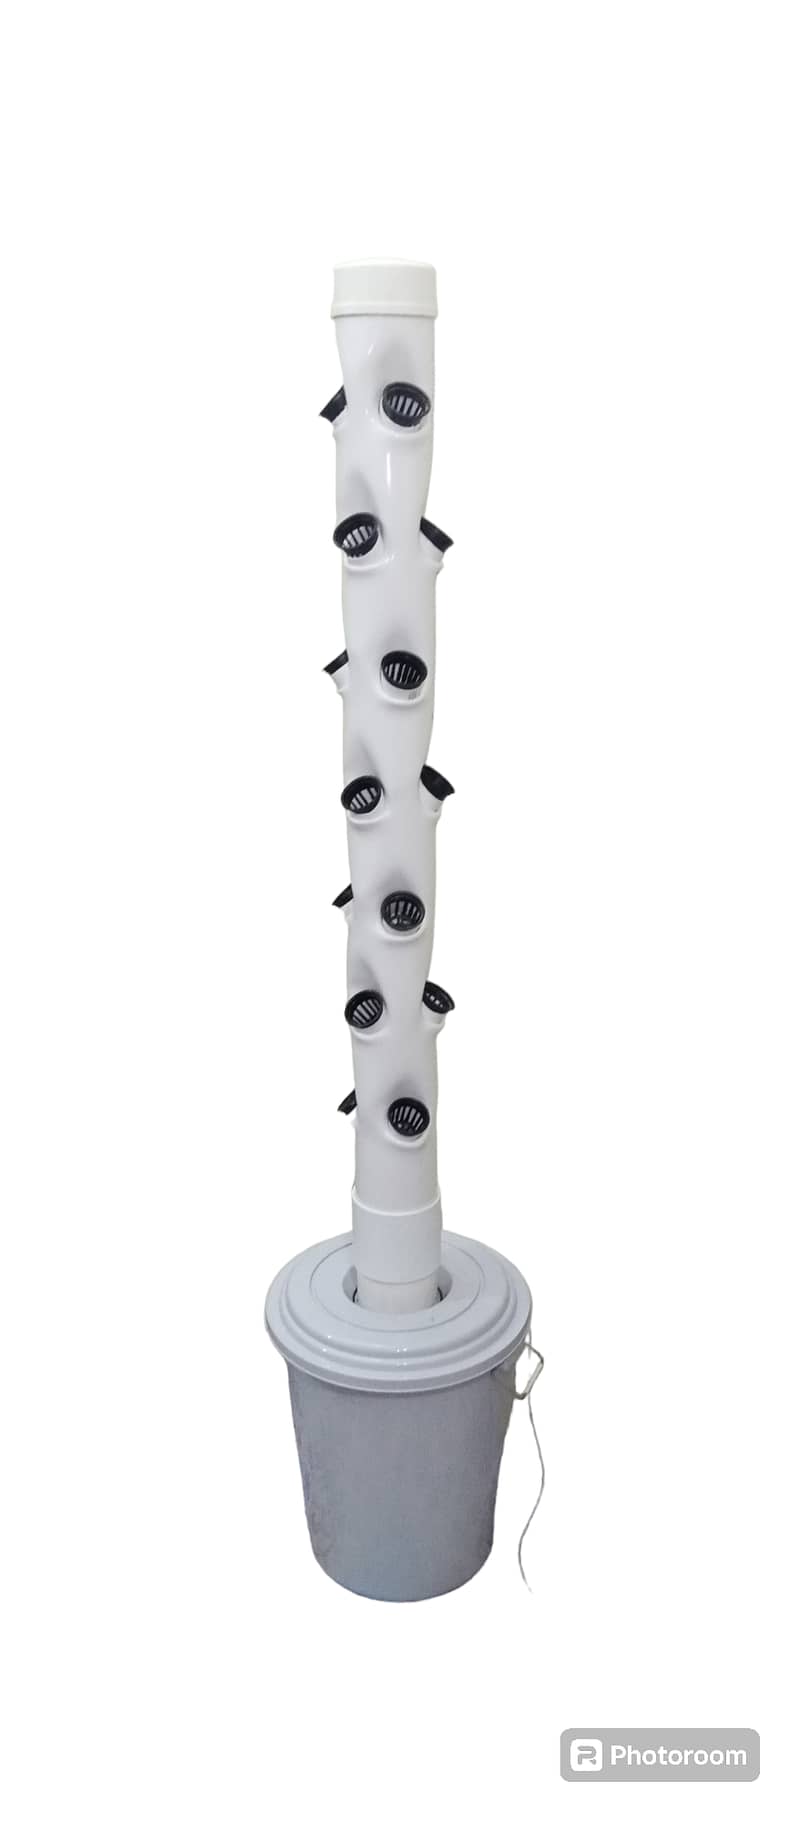 Garden Hydroponic Growing System Vertical Tower - Vegetable Pla 6